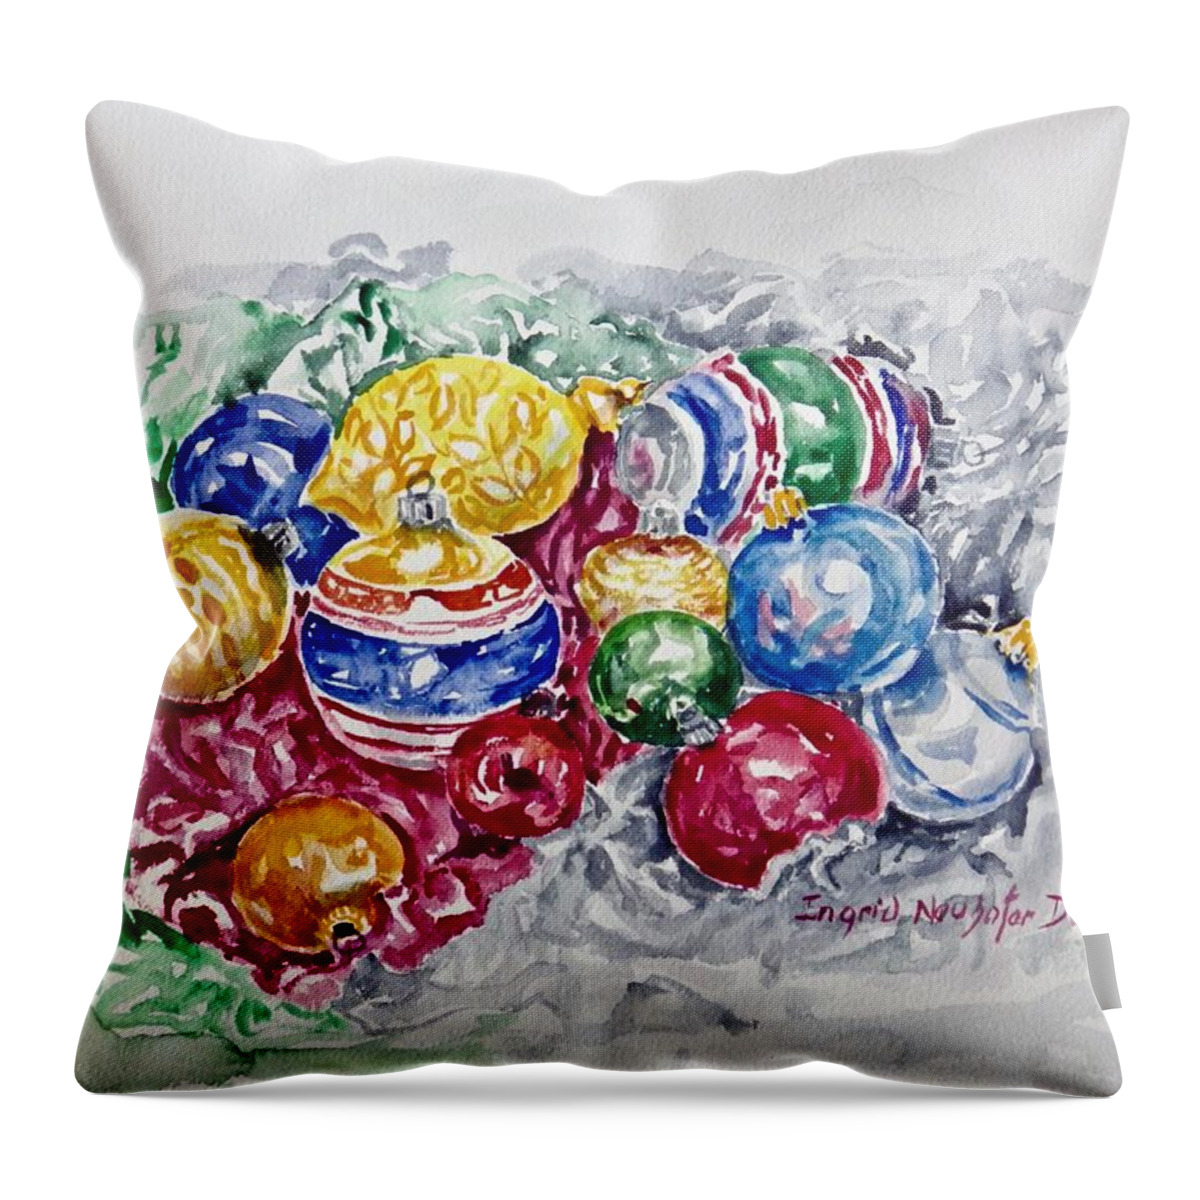 Still Life Throw Pillow featuring the painting Christmas Ornaments by Ingrid Dohm